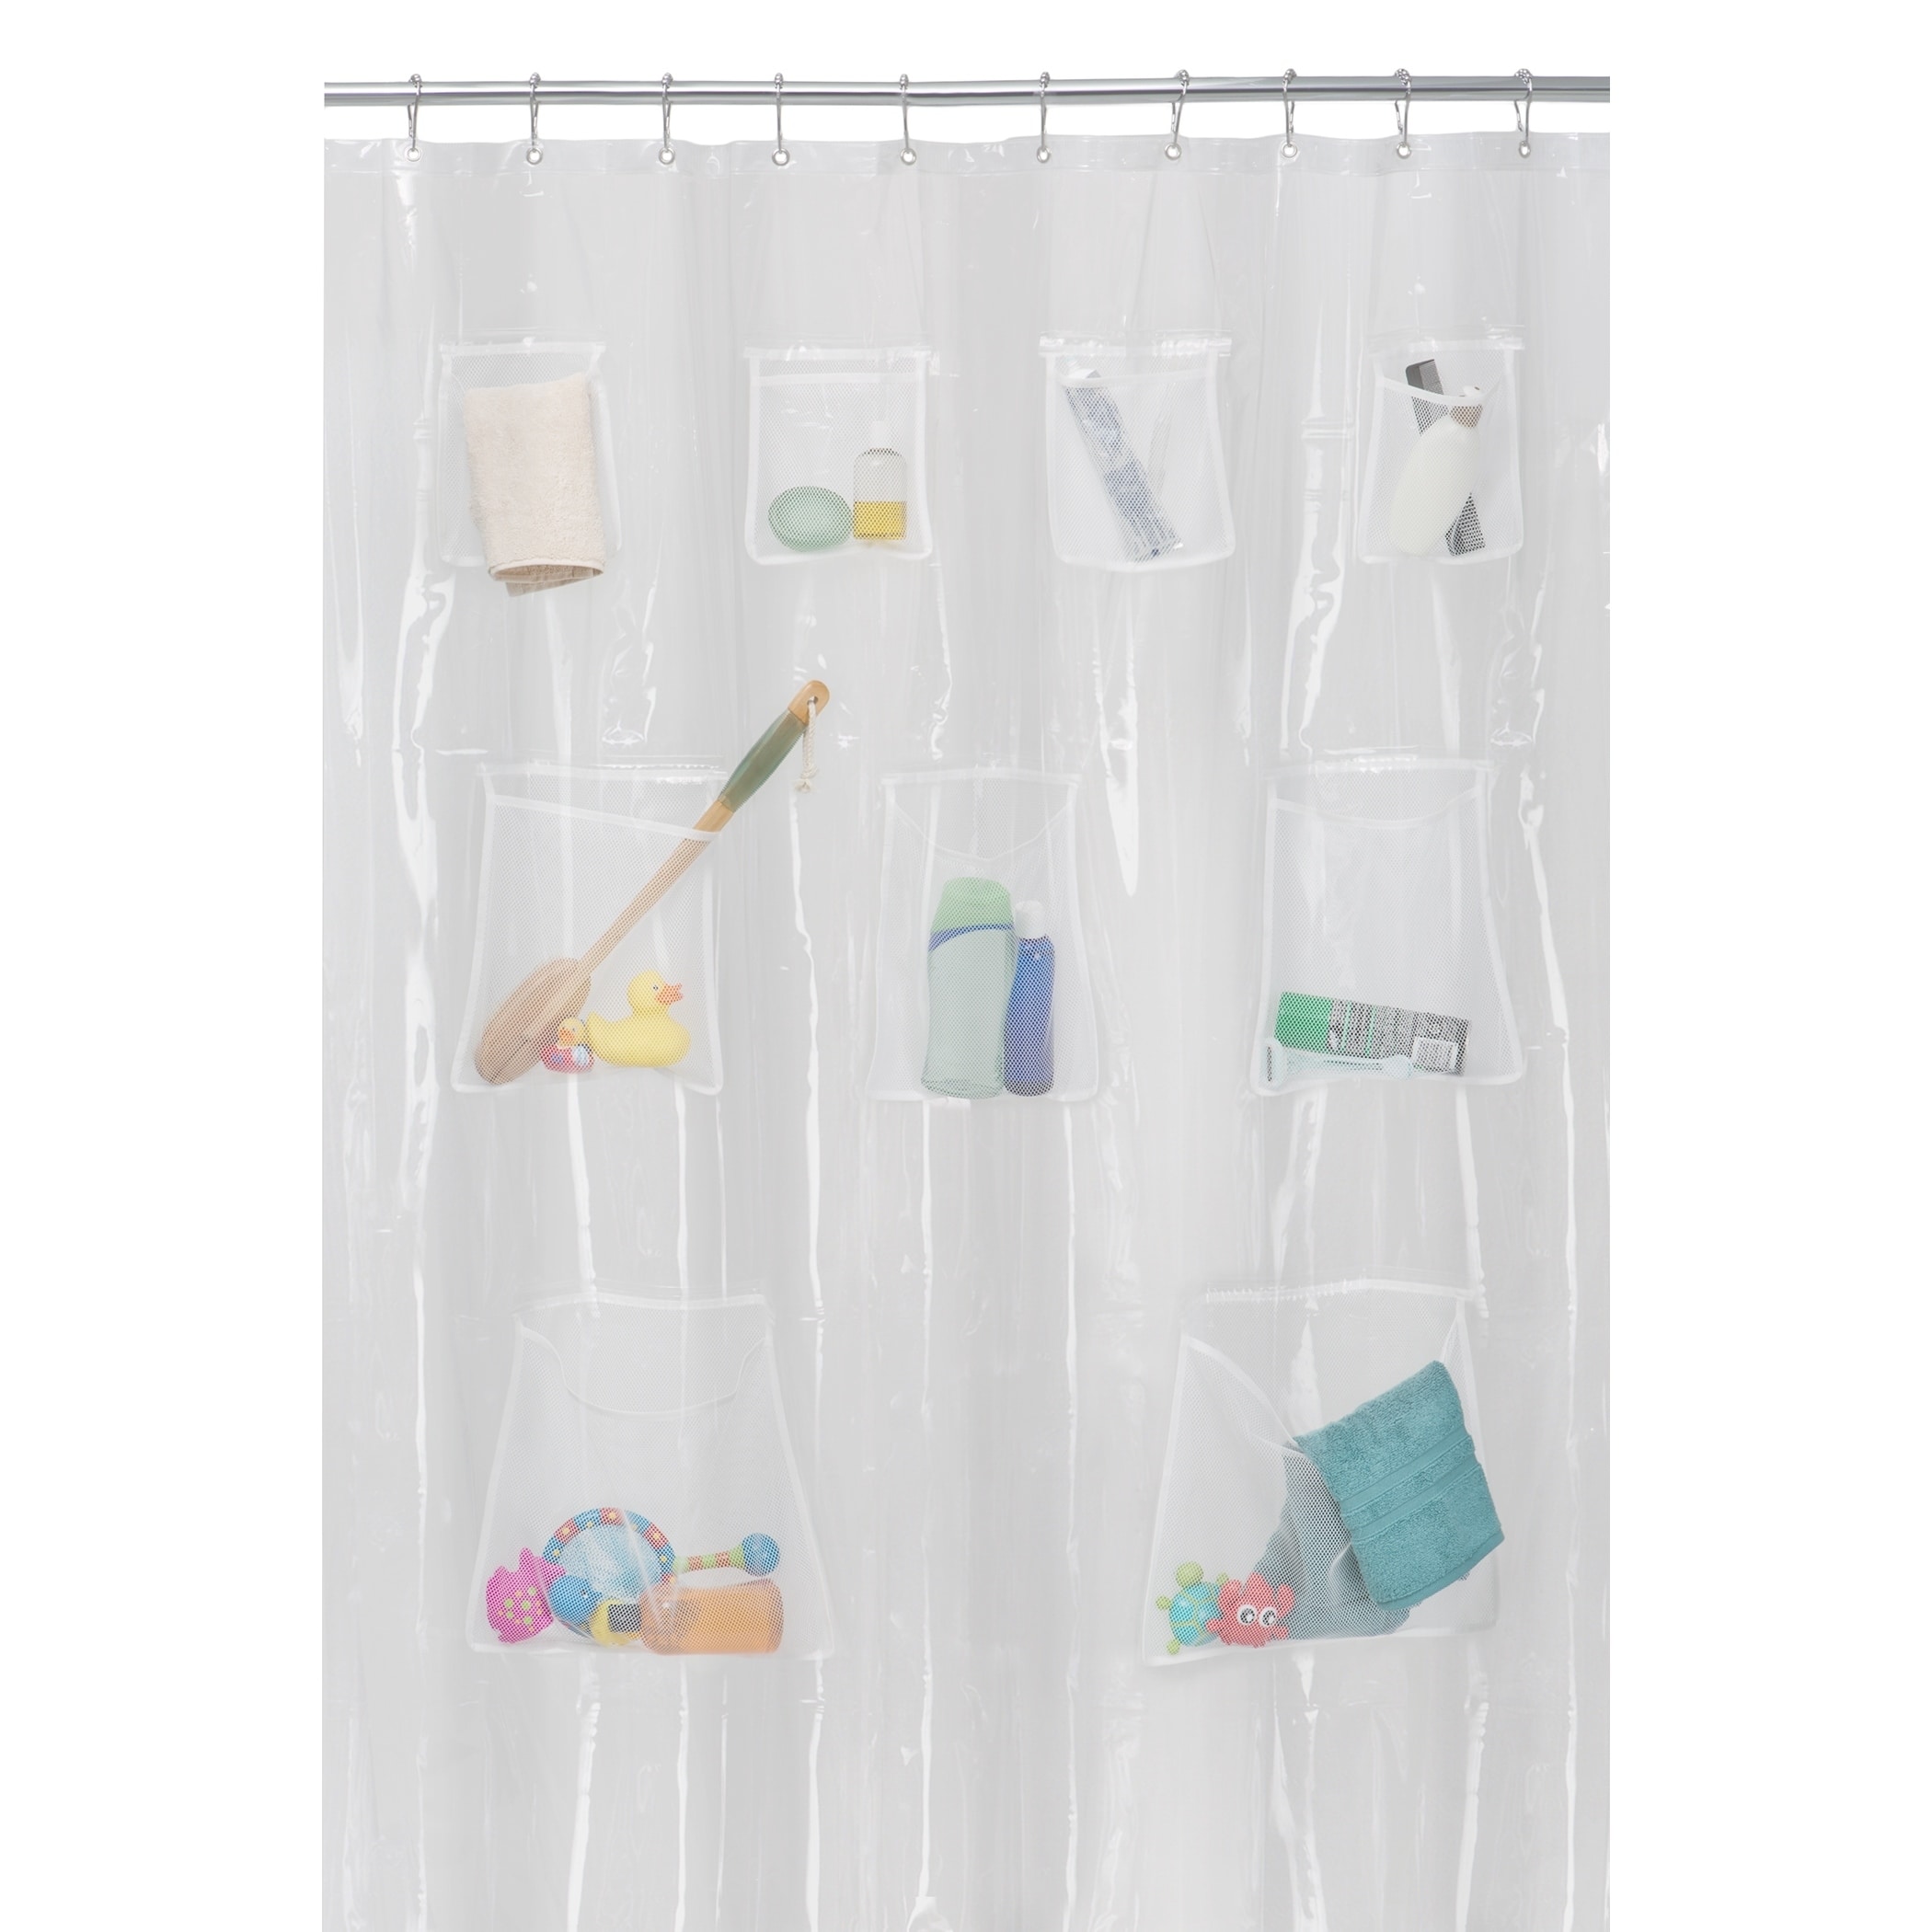 shower curtain with pockets uk